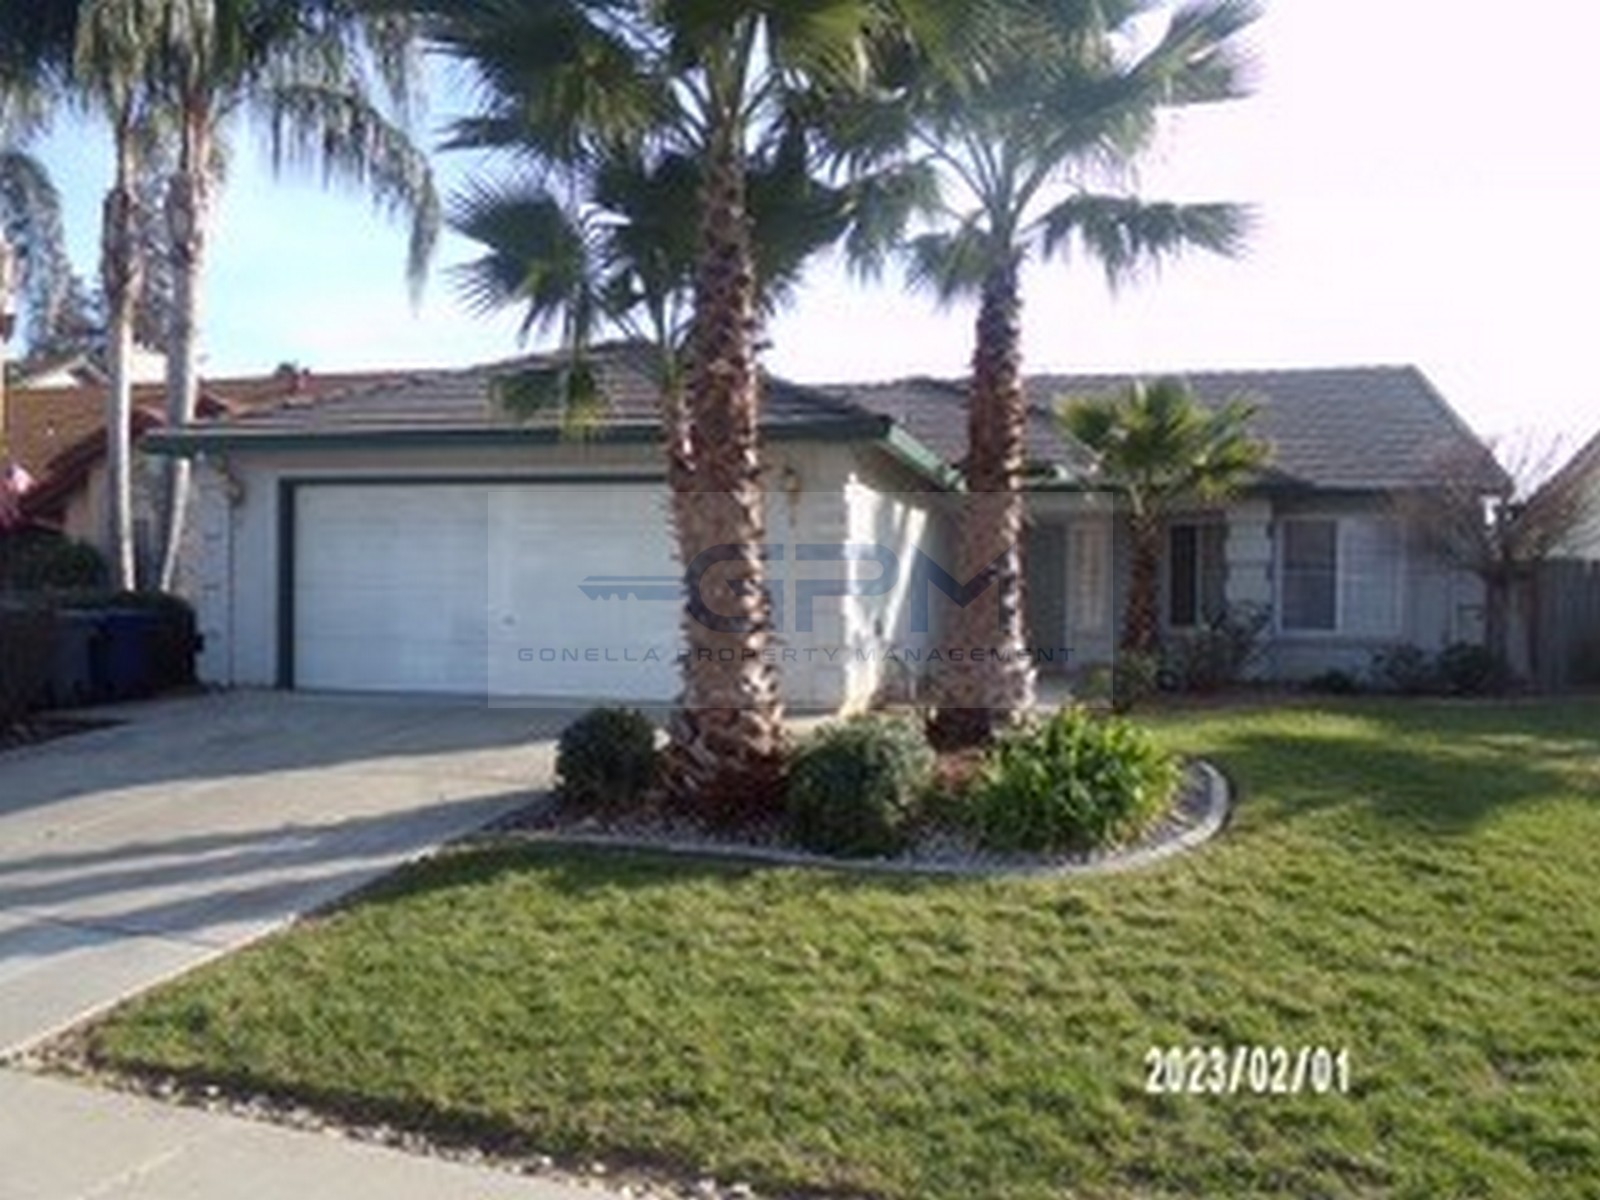 1188 Ensenada Ct (R Street, Left on Buena Vista, Right on Tres Logos, Right on 
Ensenada) 1528 sf Living room, kitchen, laundry hook-ups, landscaped front and back attached 2 car garage. No Pets.

 Gonella Property Management DRE#01103054
Credit Check required = $30 processing fee per applicant (Payable by cashiers  check or money order)
All tenants are required to obtain renters insurance of at least 100K prior to signing lease.
FOR MORE INFORMATION – CALL GONELLA PROPERTY MANAGEMENT 
 Gonella Property Management DRE#01103054
 
